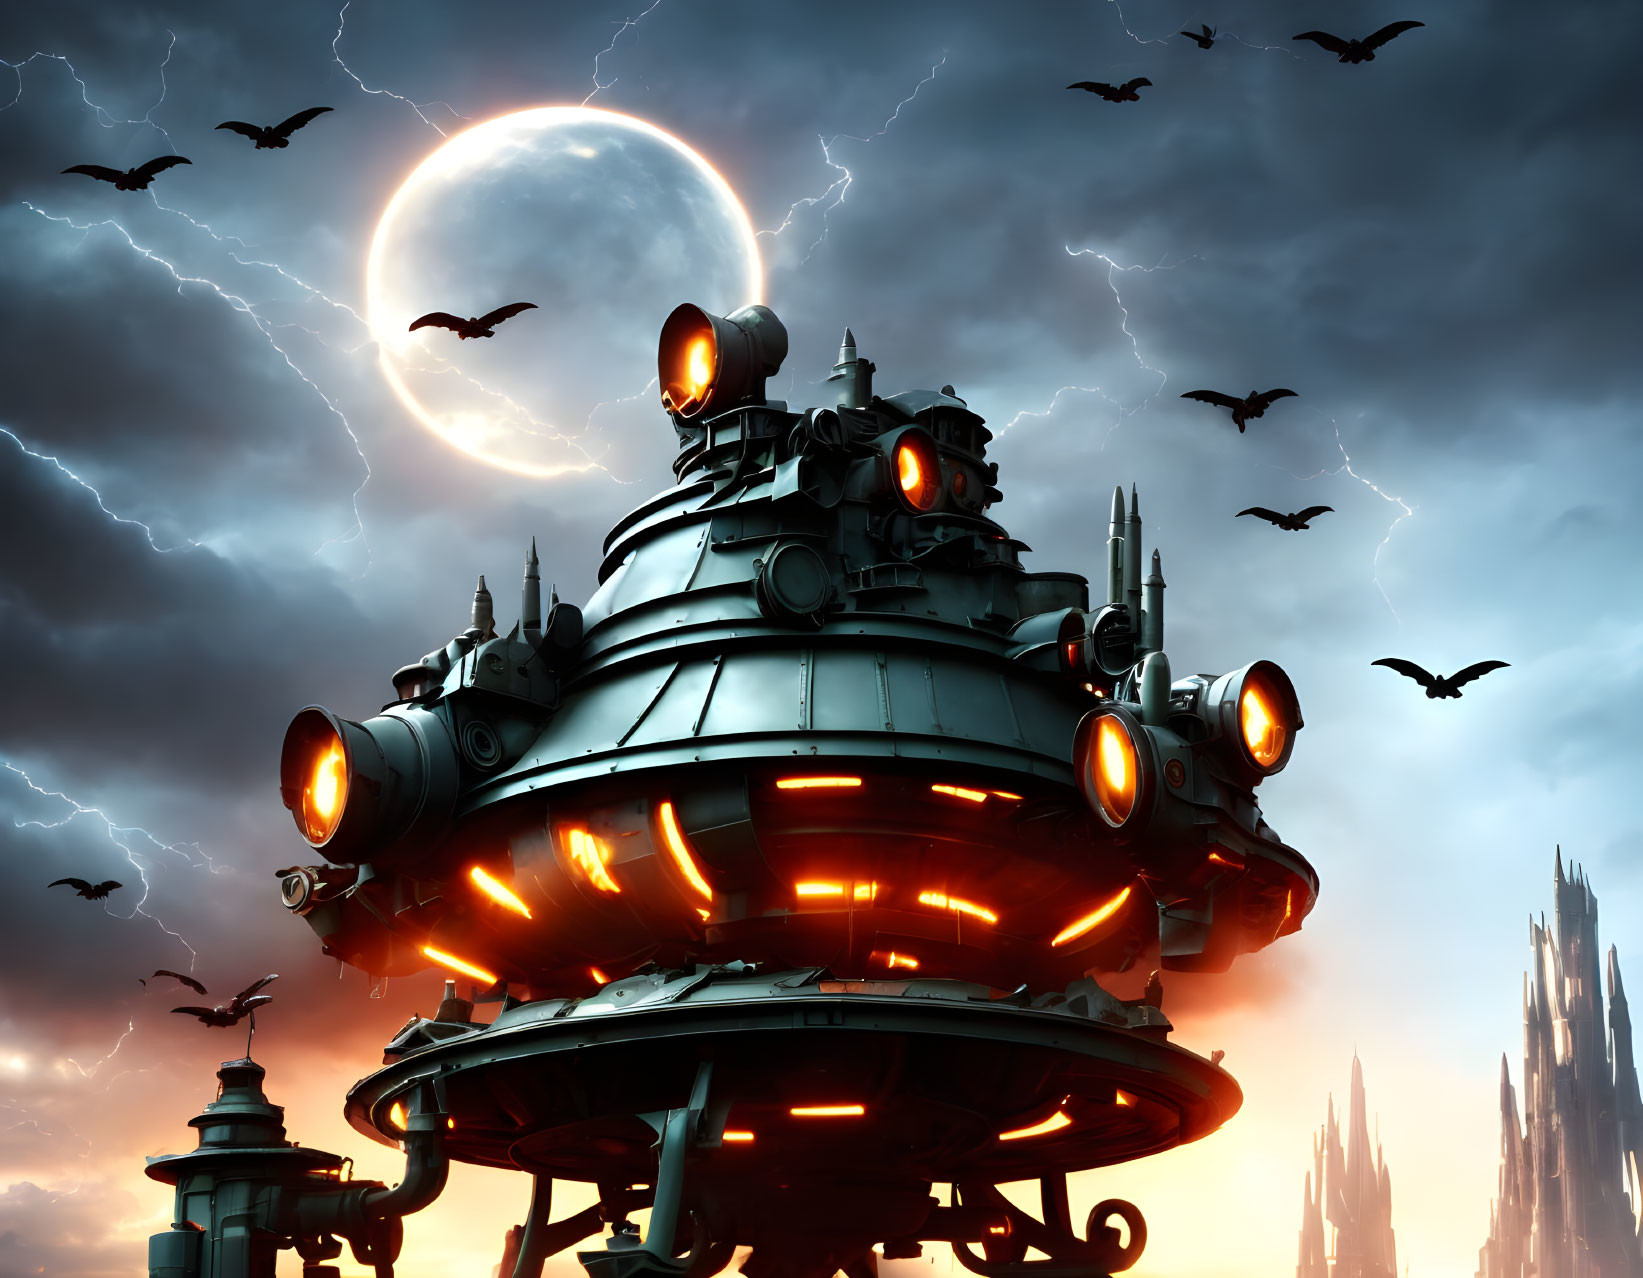 Futuristic tower with glowing orange lights under a full moon in a dark, ominous sky